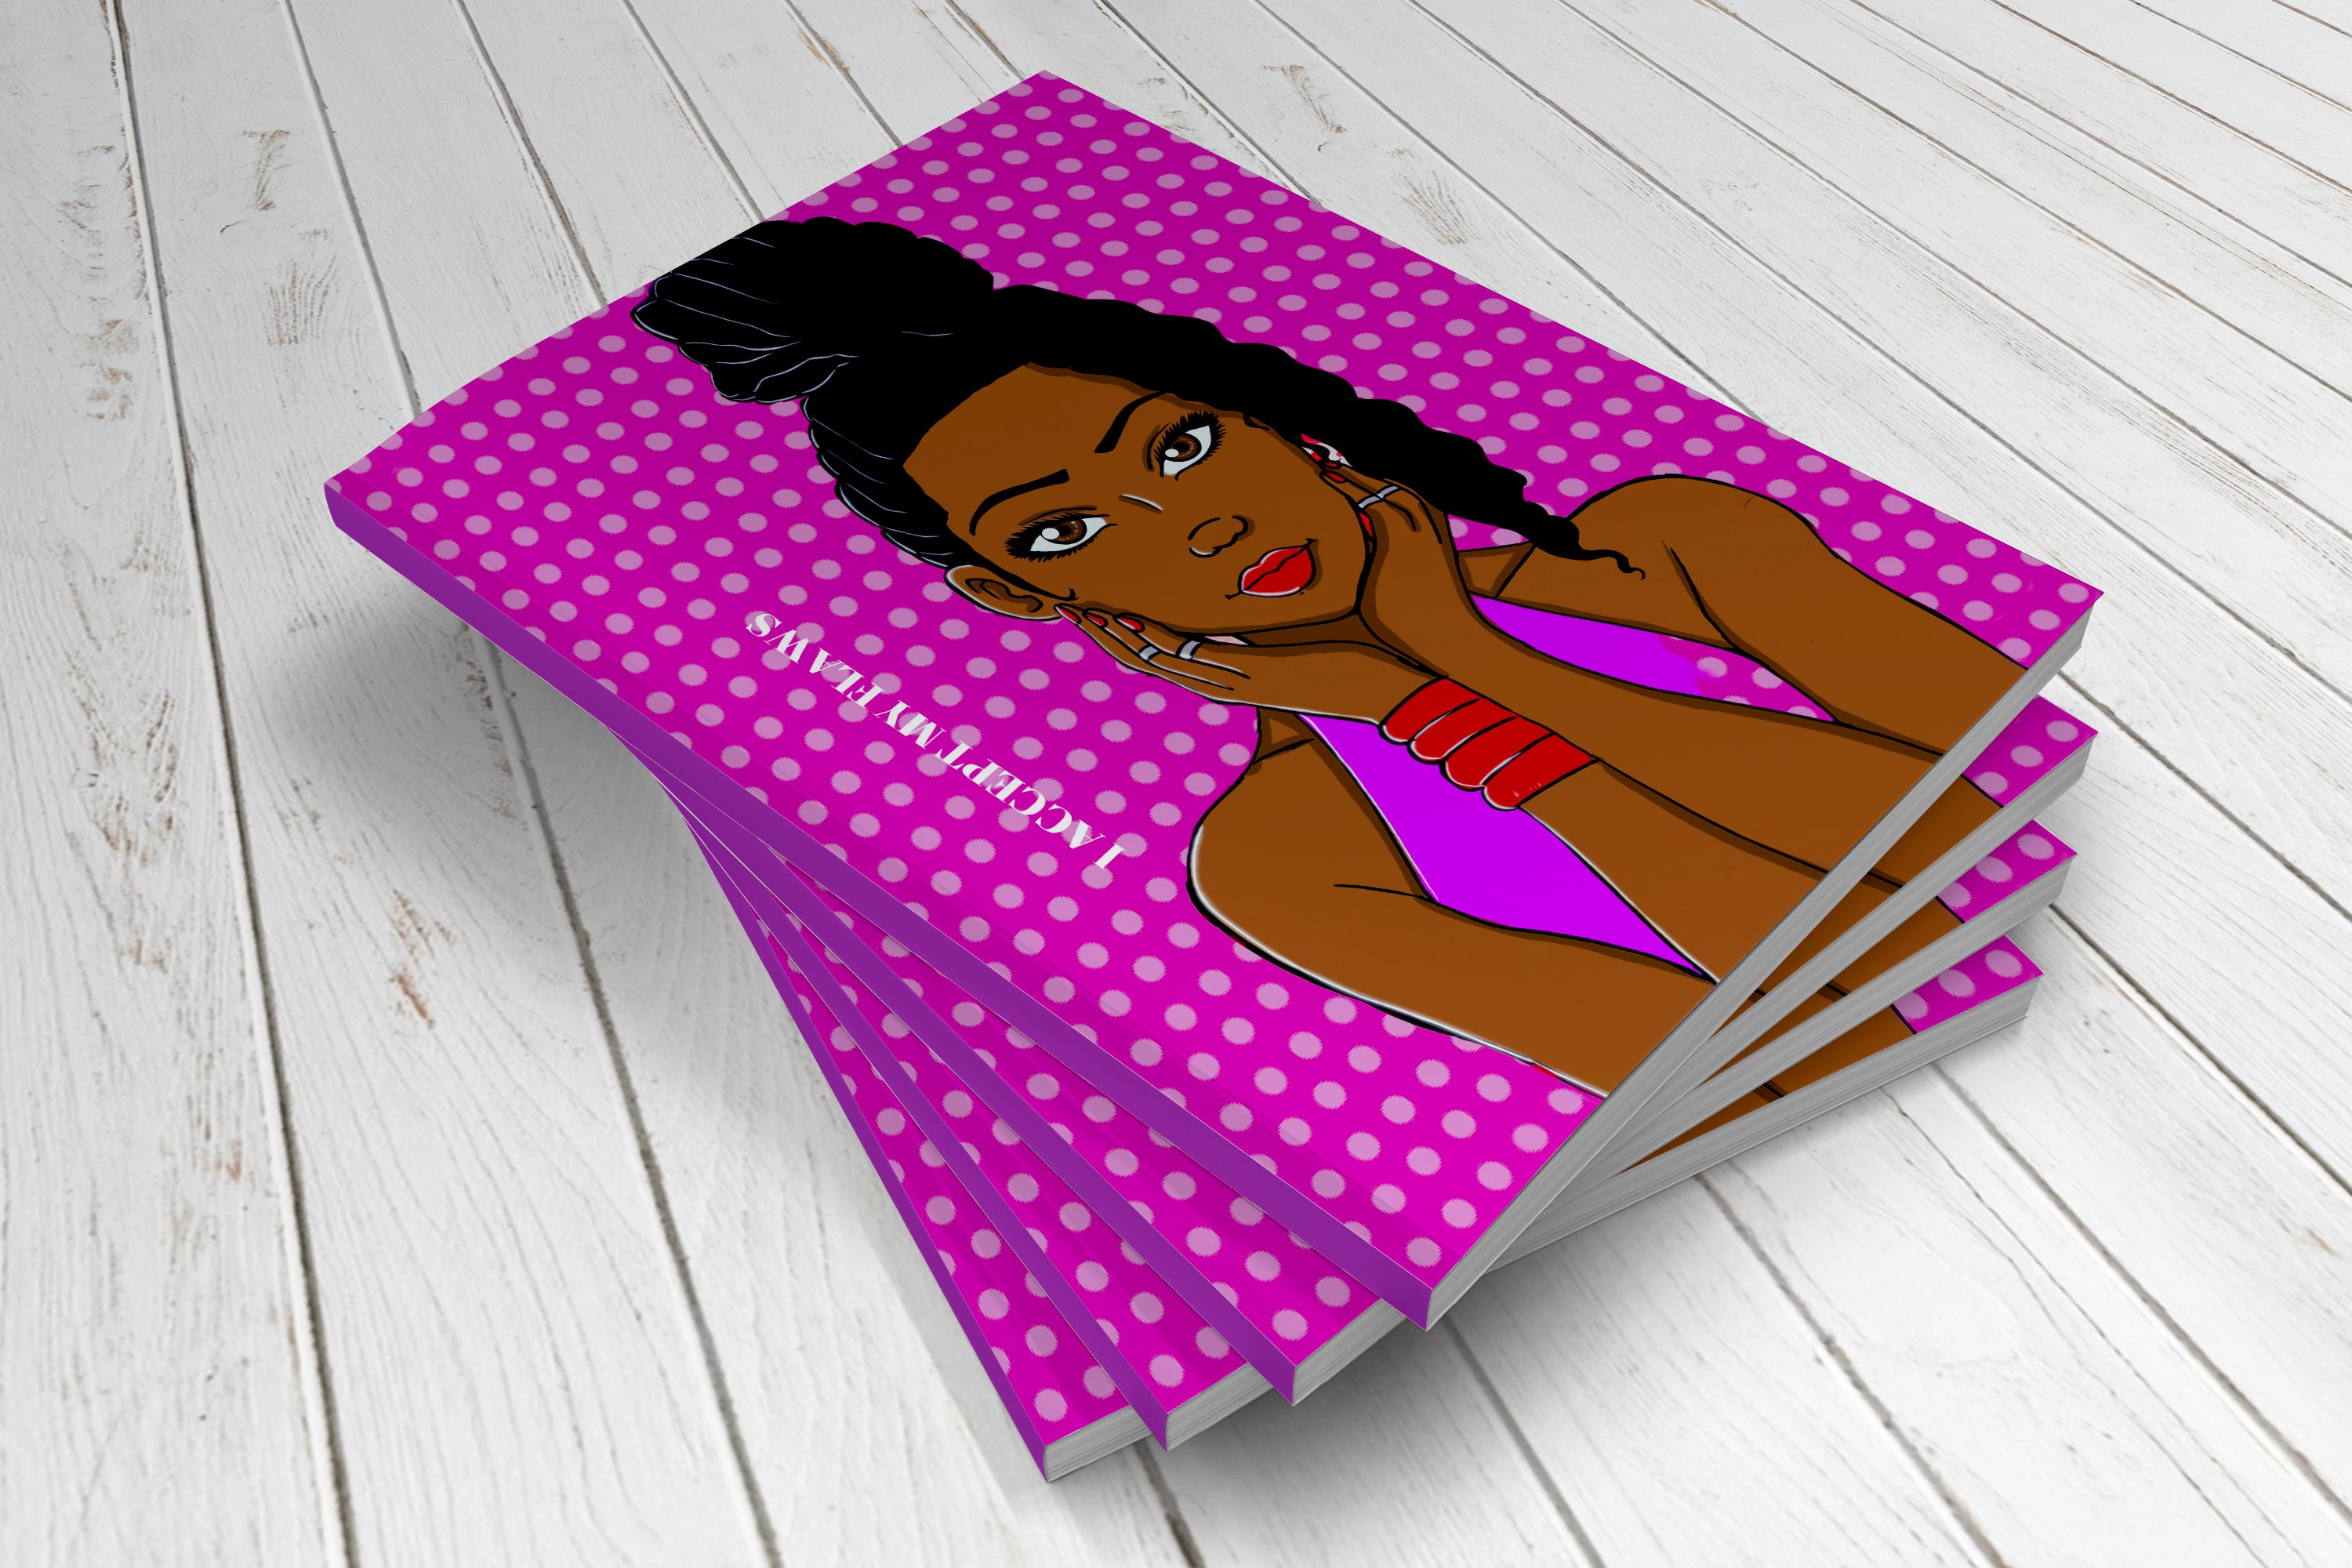 She's So Epic Empowers Young Women with Inspirational Journaling Series